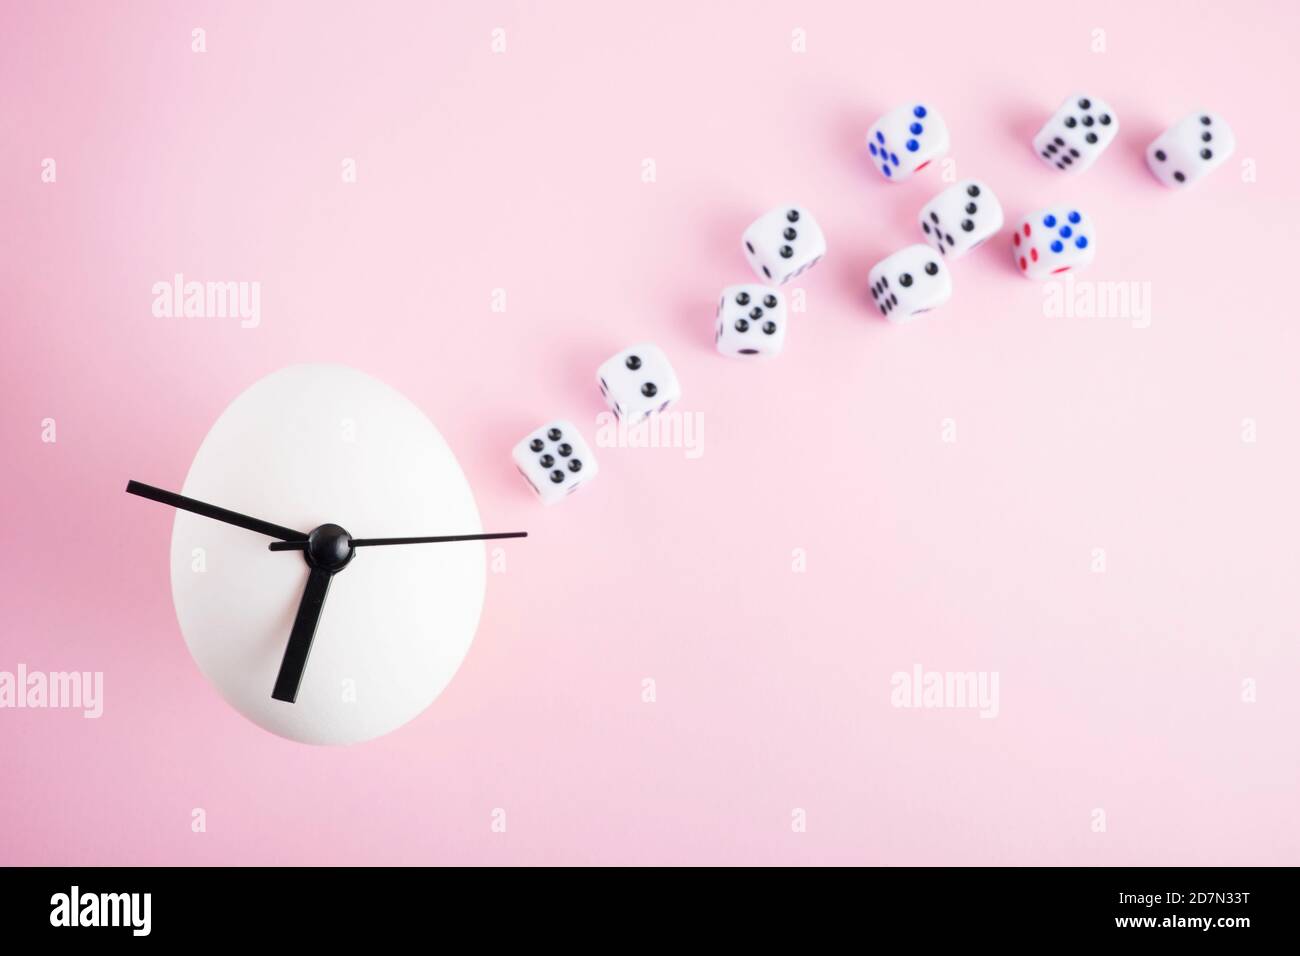 Egg clock and dice on pink background. Stock Photo